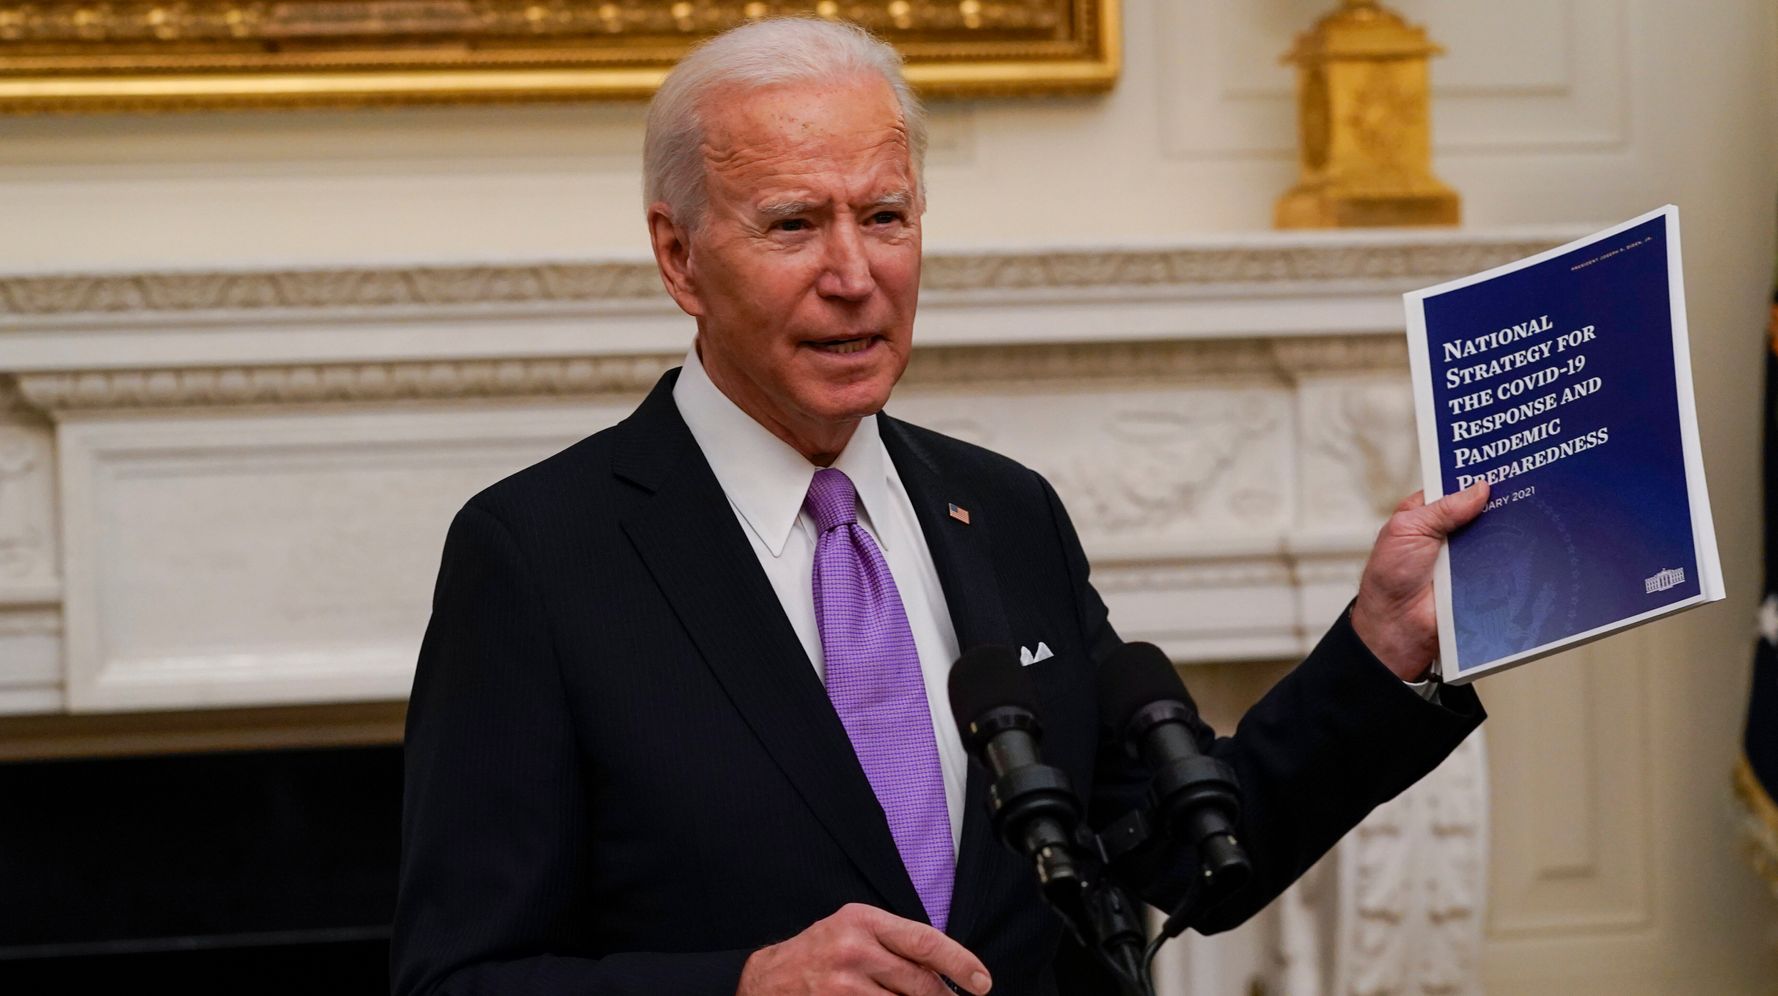 Biden Signs Executive Orders To Battle Pandemic: ‘This Is A Wartime Undertaking’